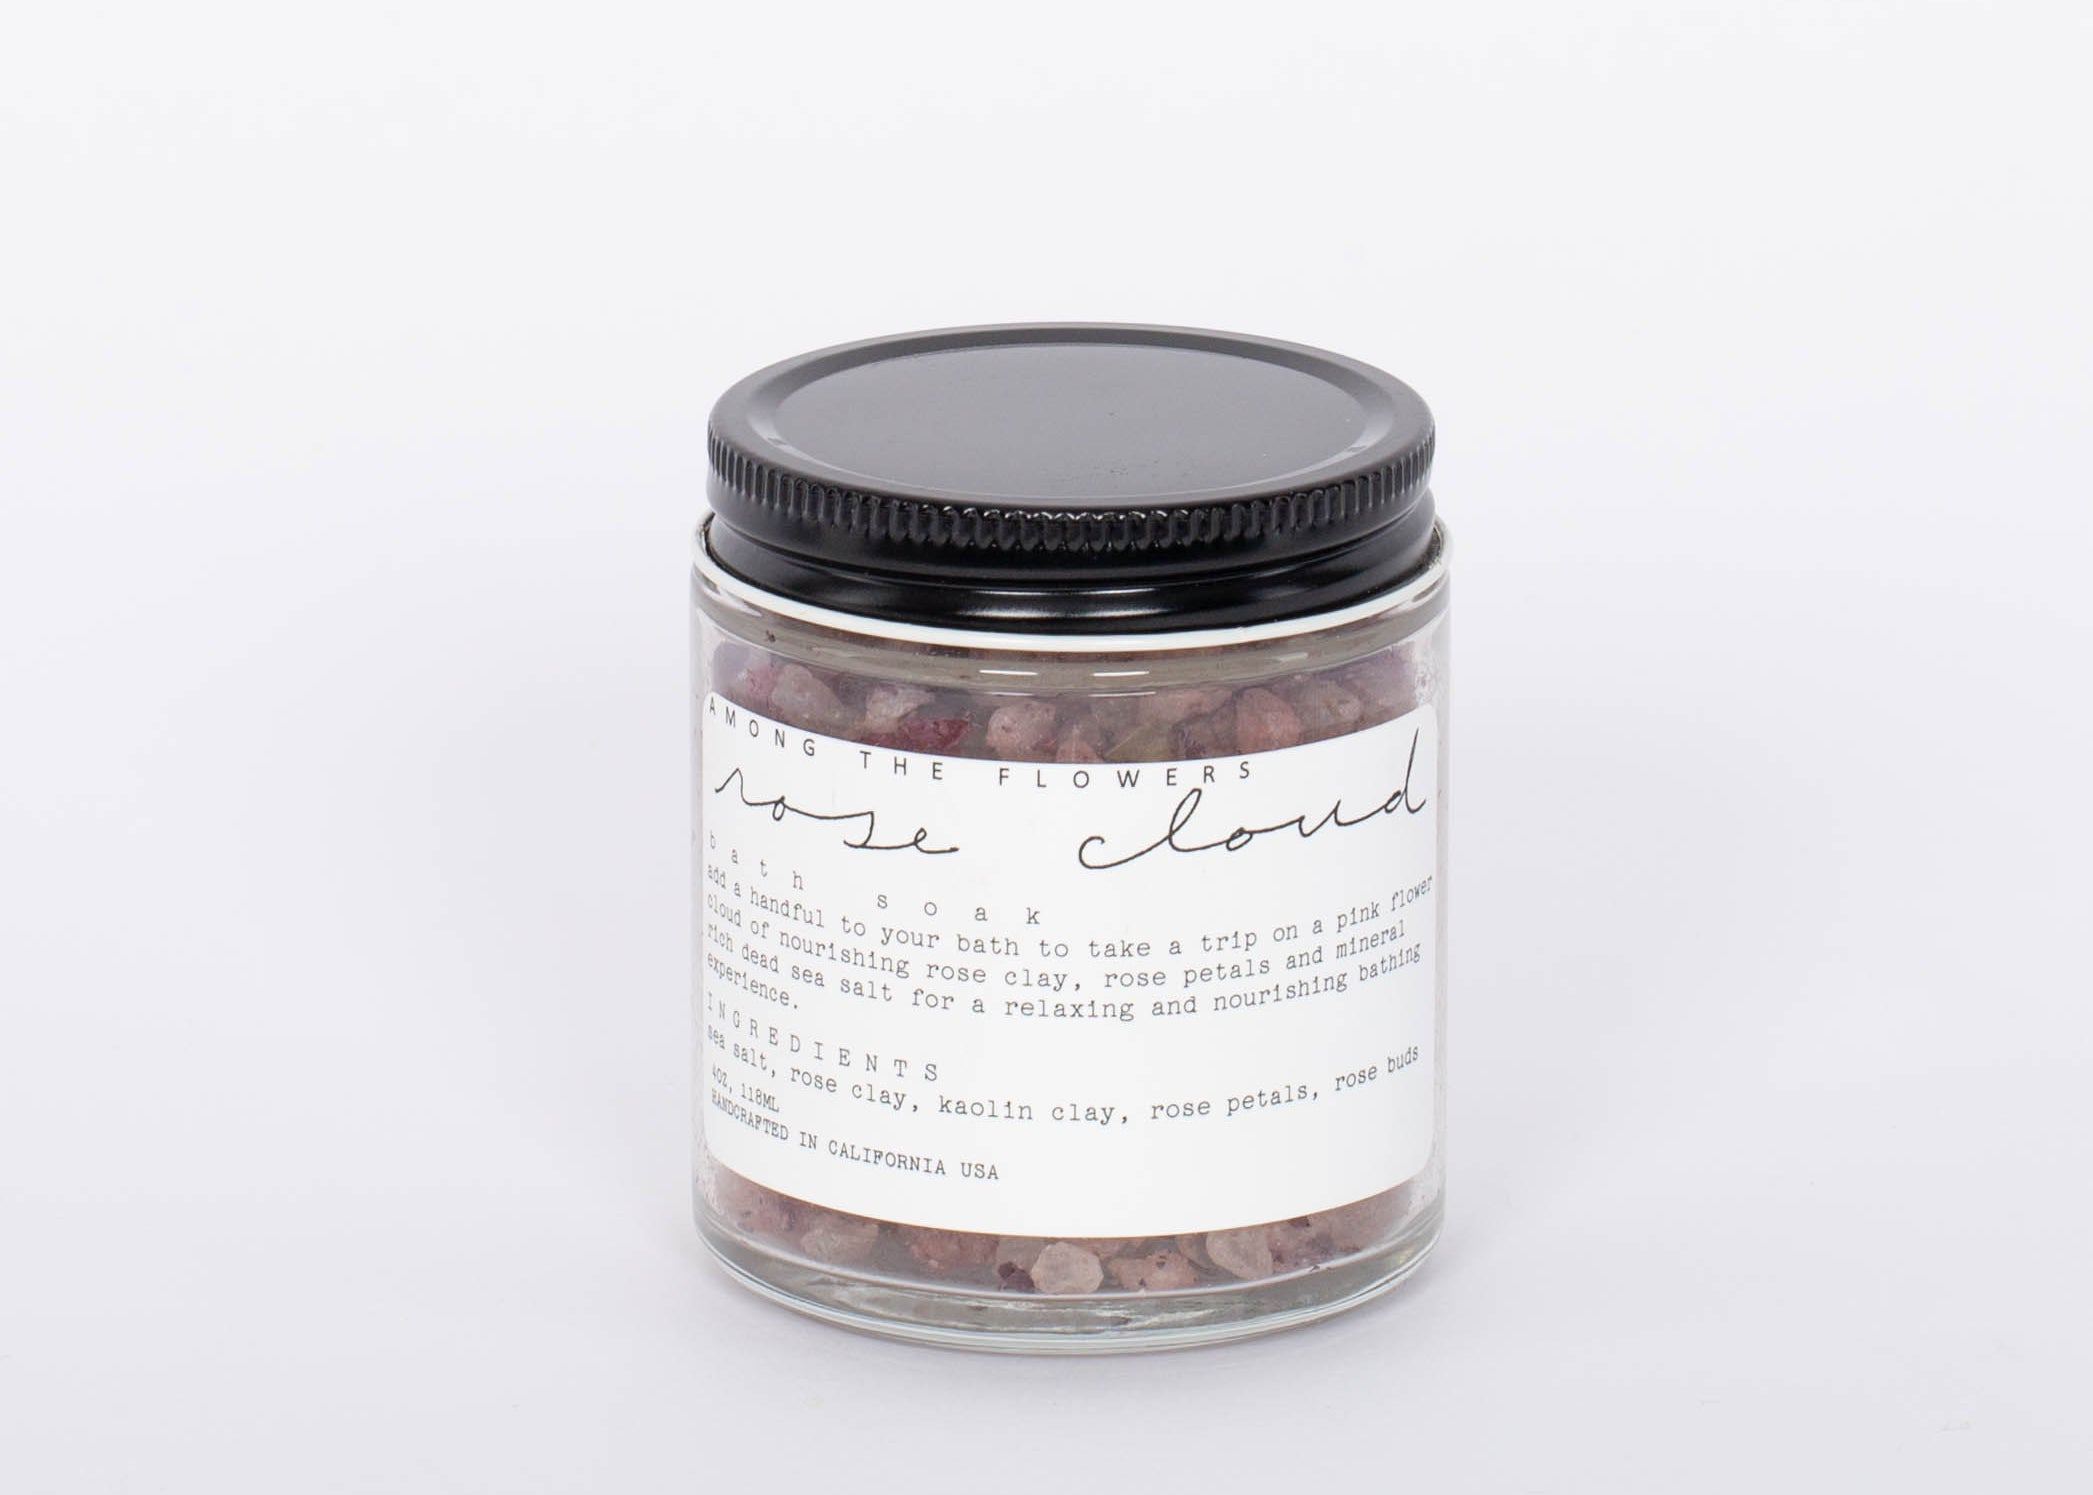 Among the Flowers Rose Cloud Bath Soak. R O S E C L O U D  Rose clay is a nourishing clay rich in minerals and moisturizing benefits for the skin. It also provides a level of detoxification by attracting toxins. Skin will feel soft and hydrated. Rose petals and sea salt combine in a soothing pink cloud then absorb into your body and serve the cells and their function.